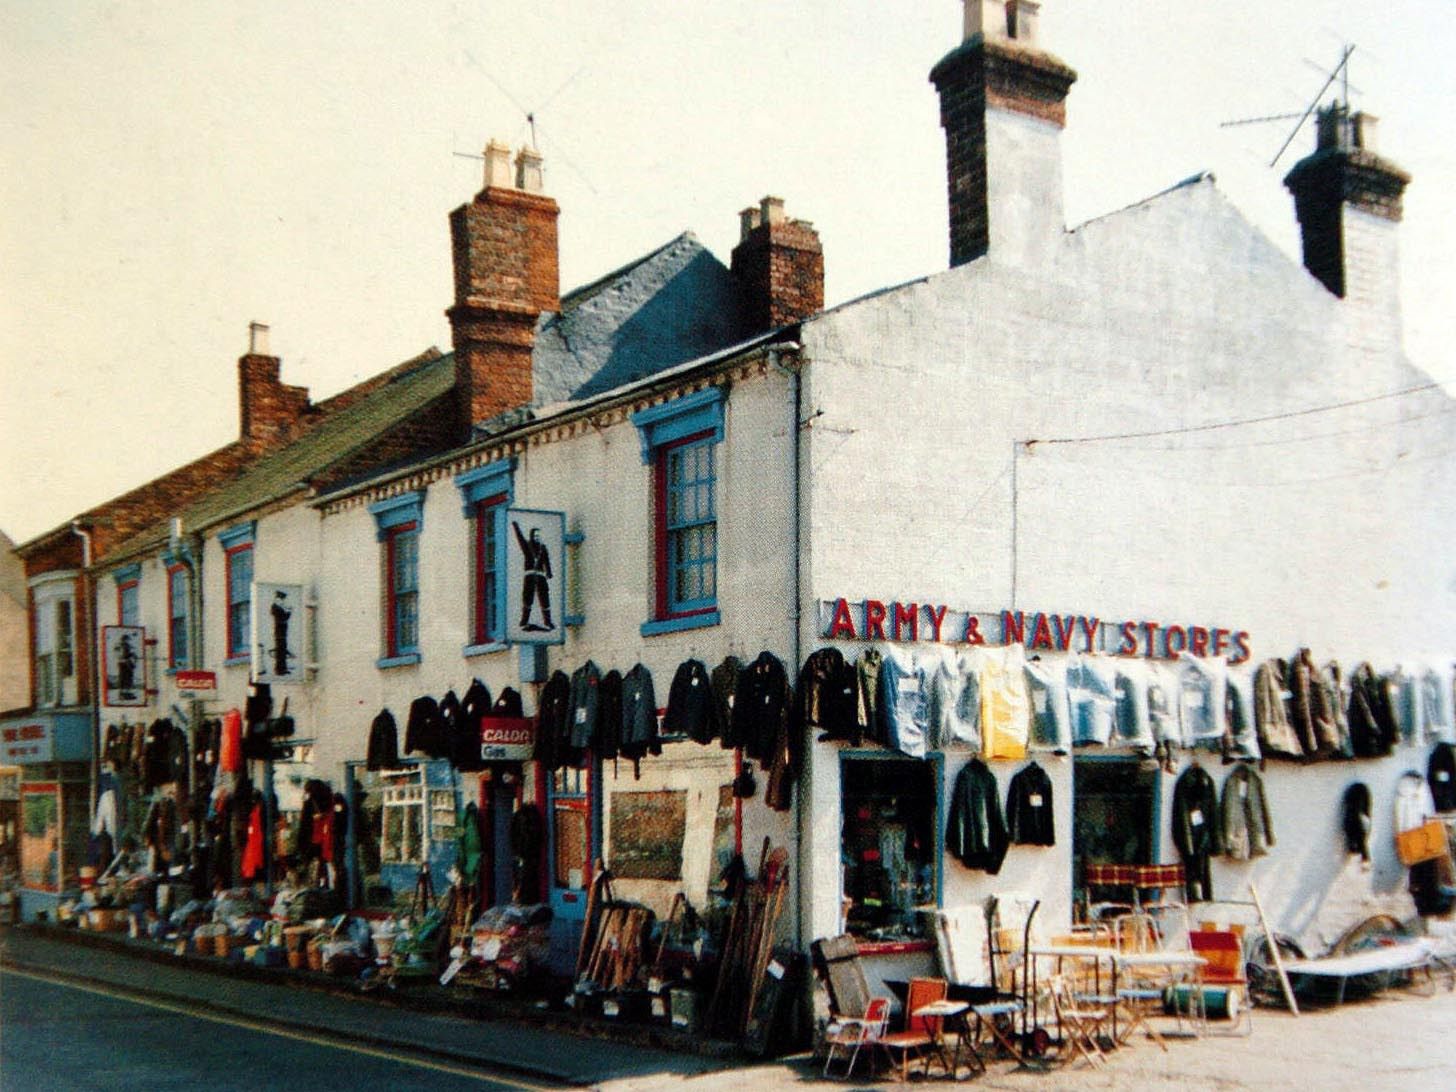 11 incredible photos of the historic Dudley shop recreated at a Black Country tourist attraction